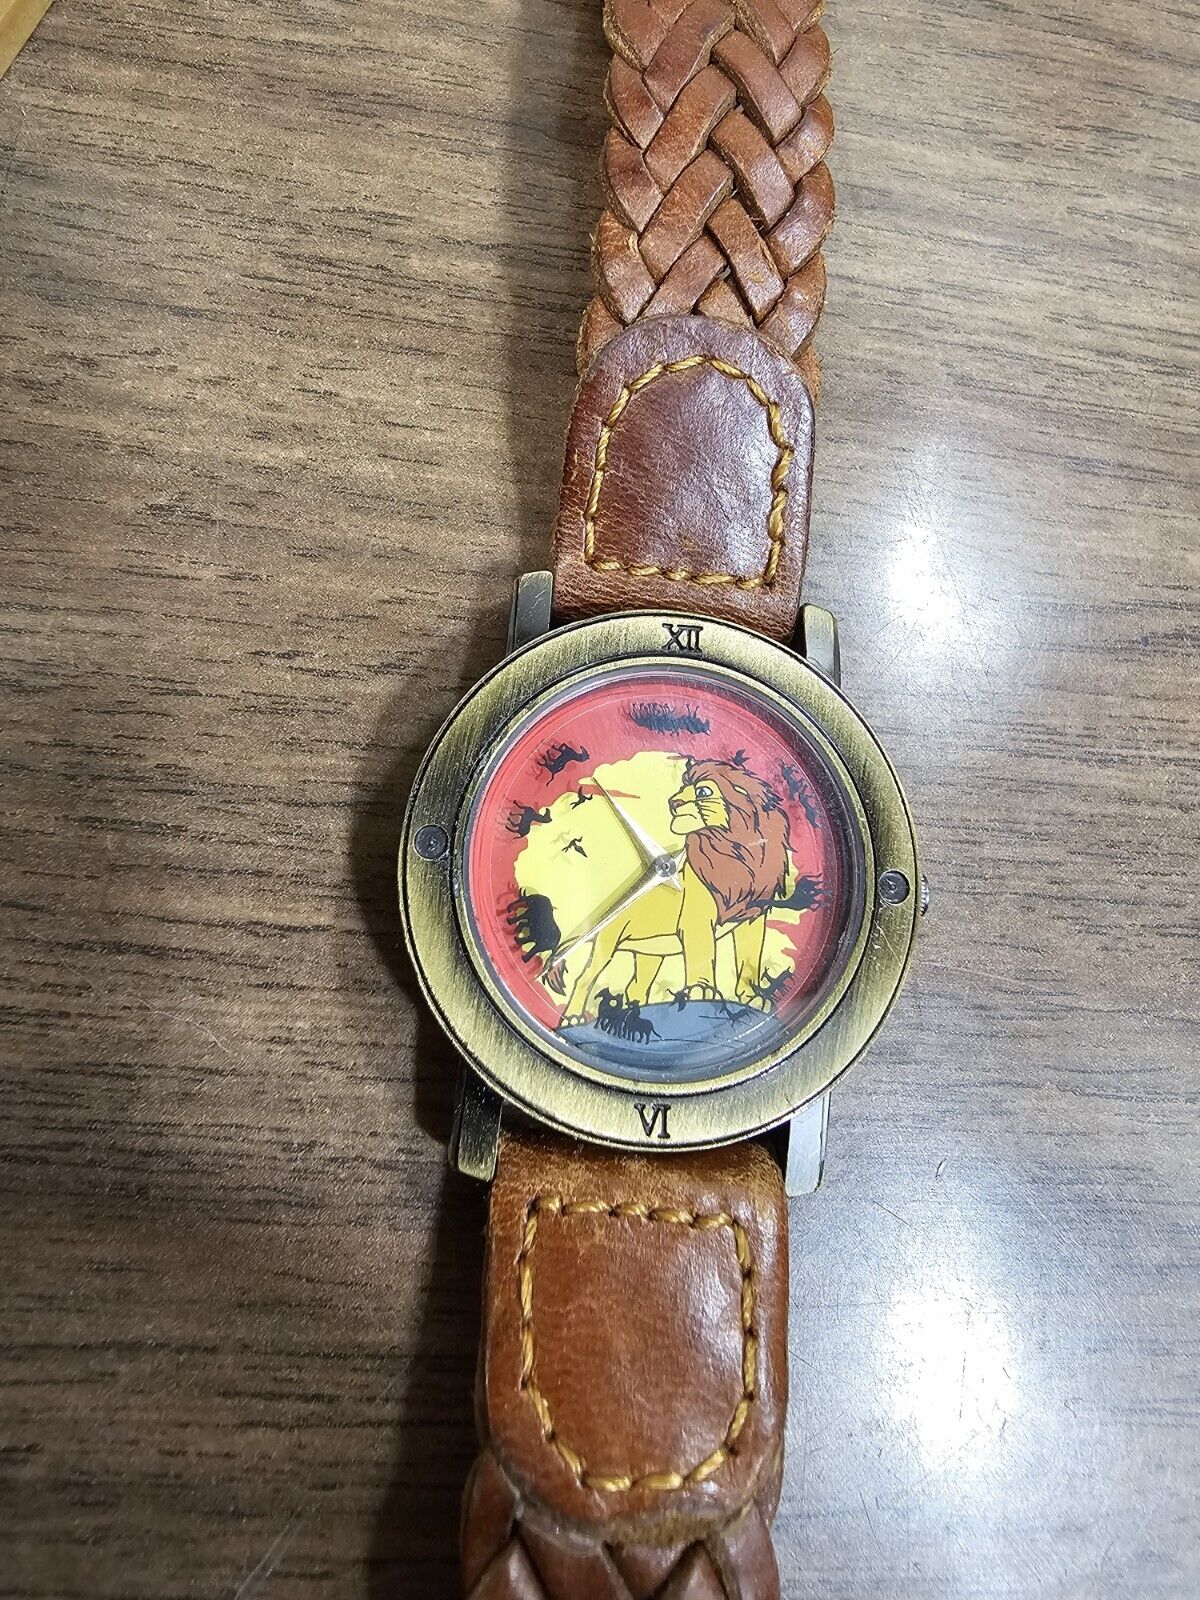 1990s Disney The Lion King Simba Limited Edition Pedre Watch Extra Bands In Box